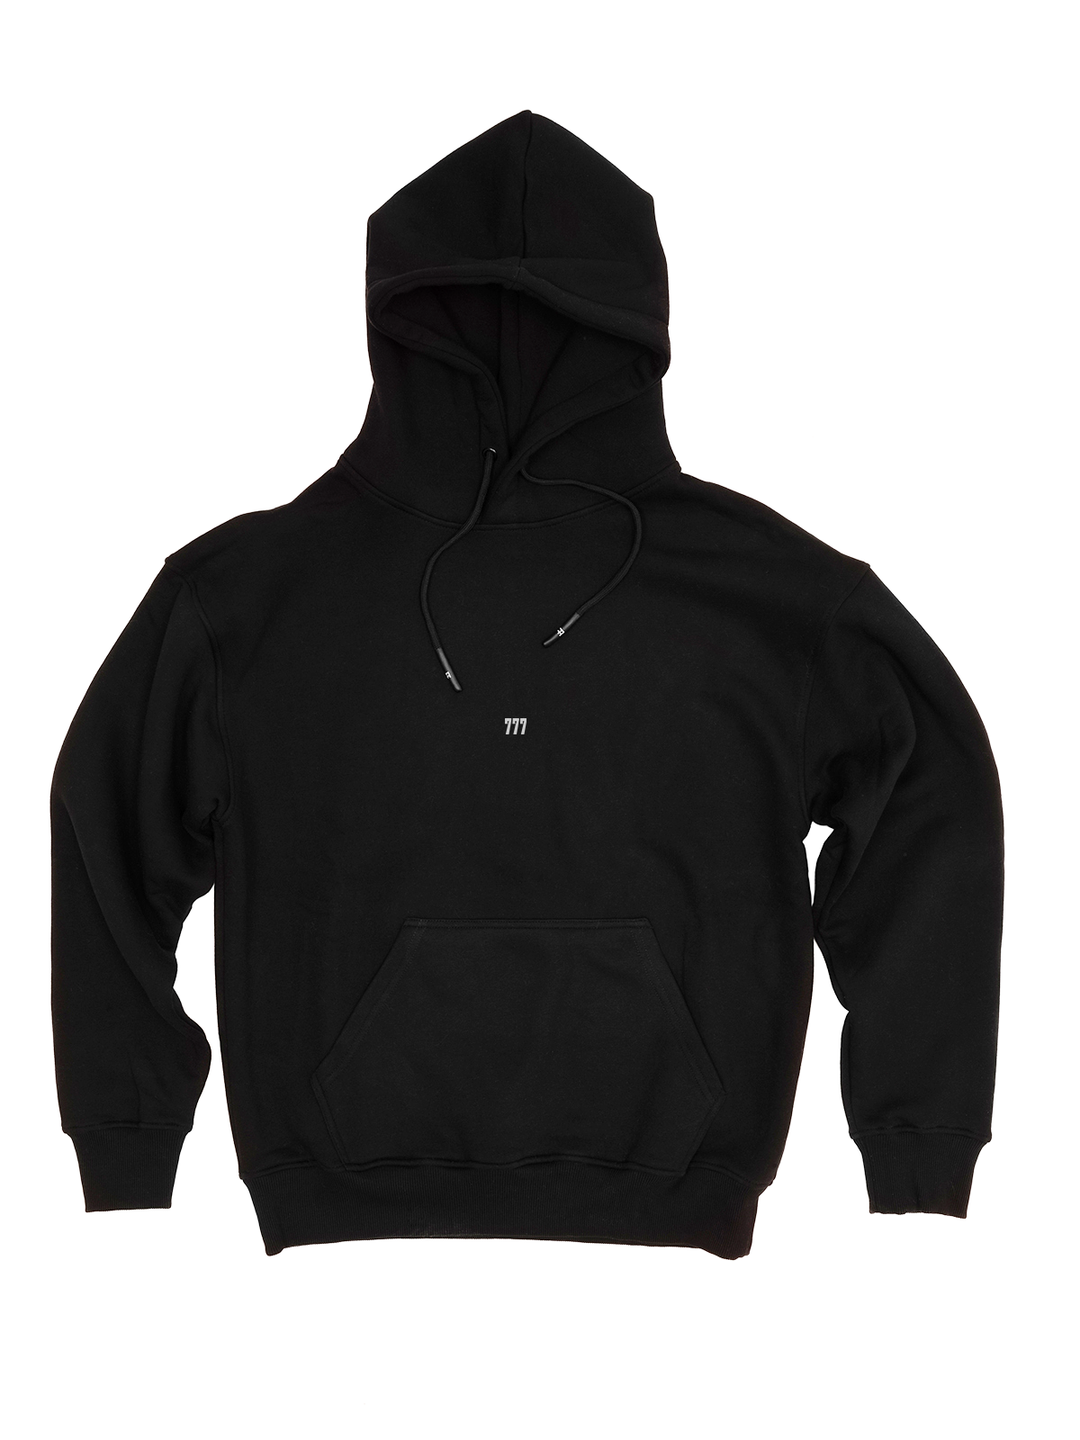 777 / Oversized Pullover Hoodie